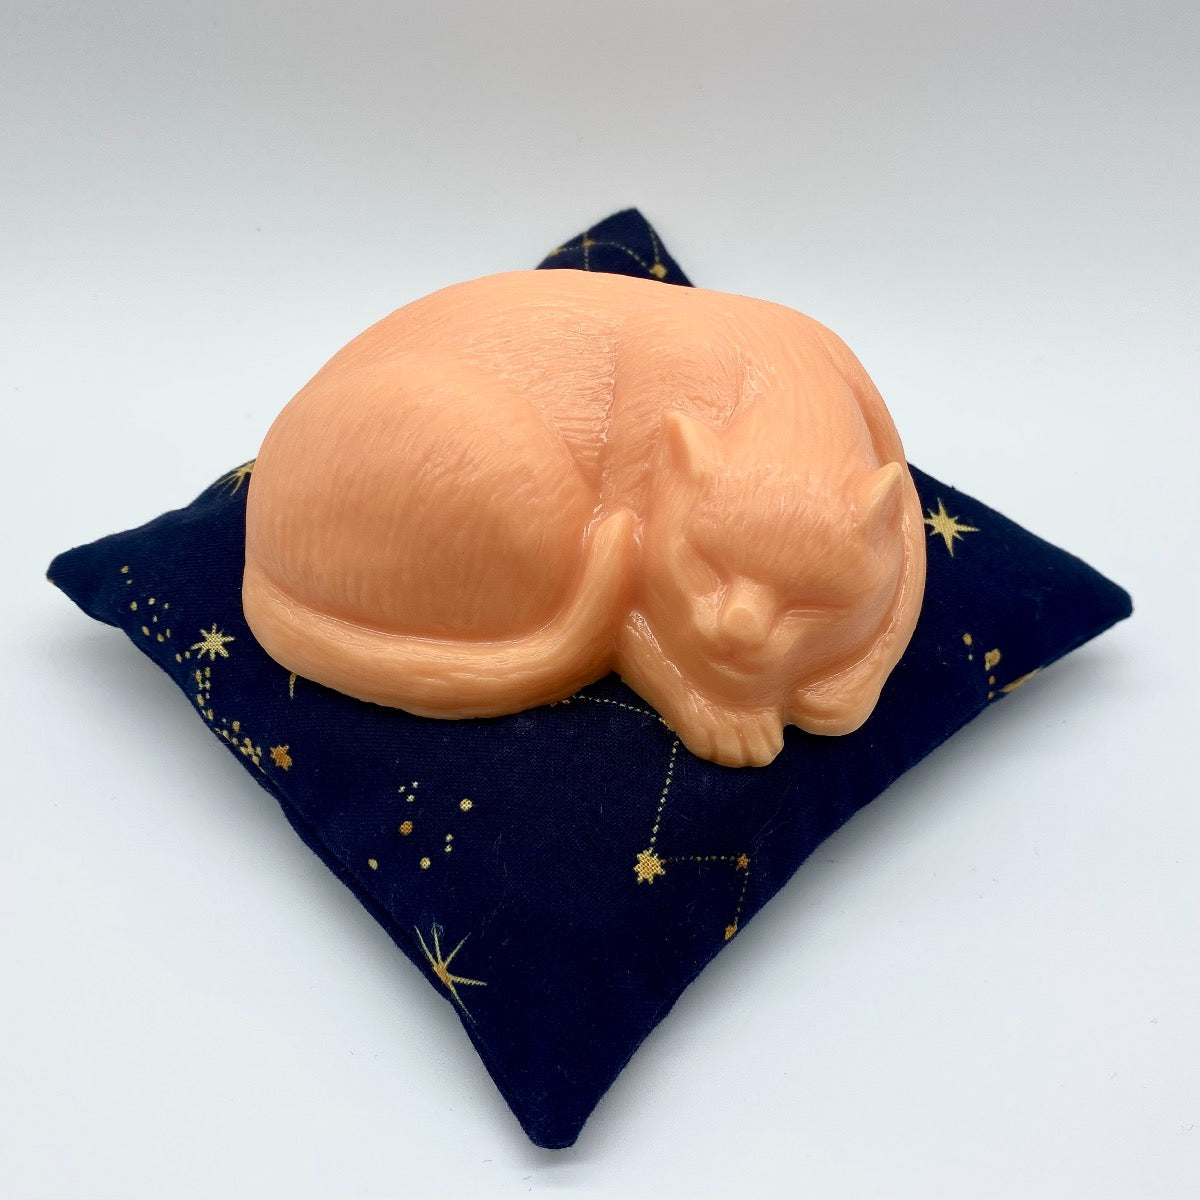 Orange sleeping cat-shaped soap on a navy blue celestial print square pillow